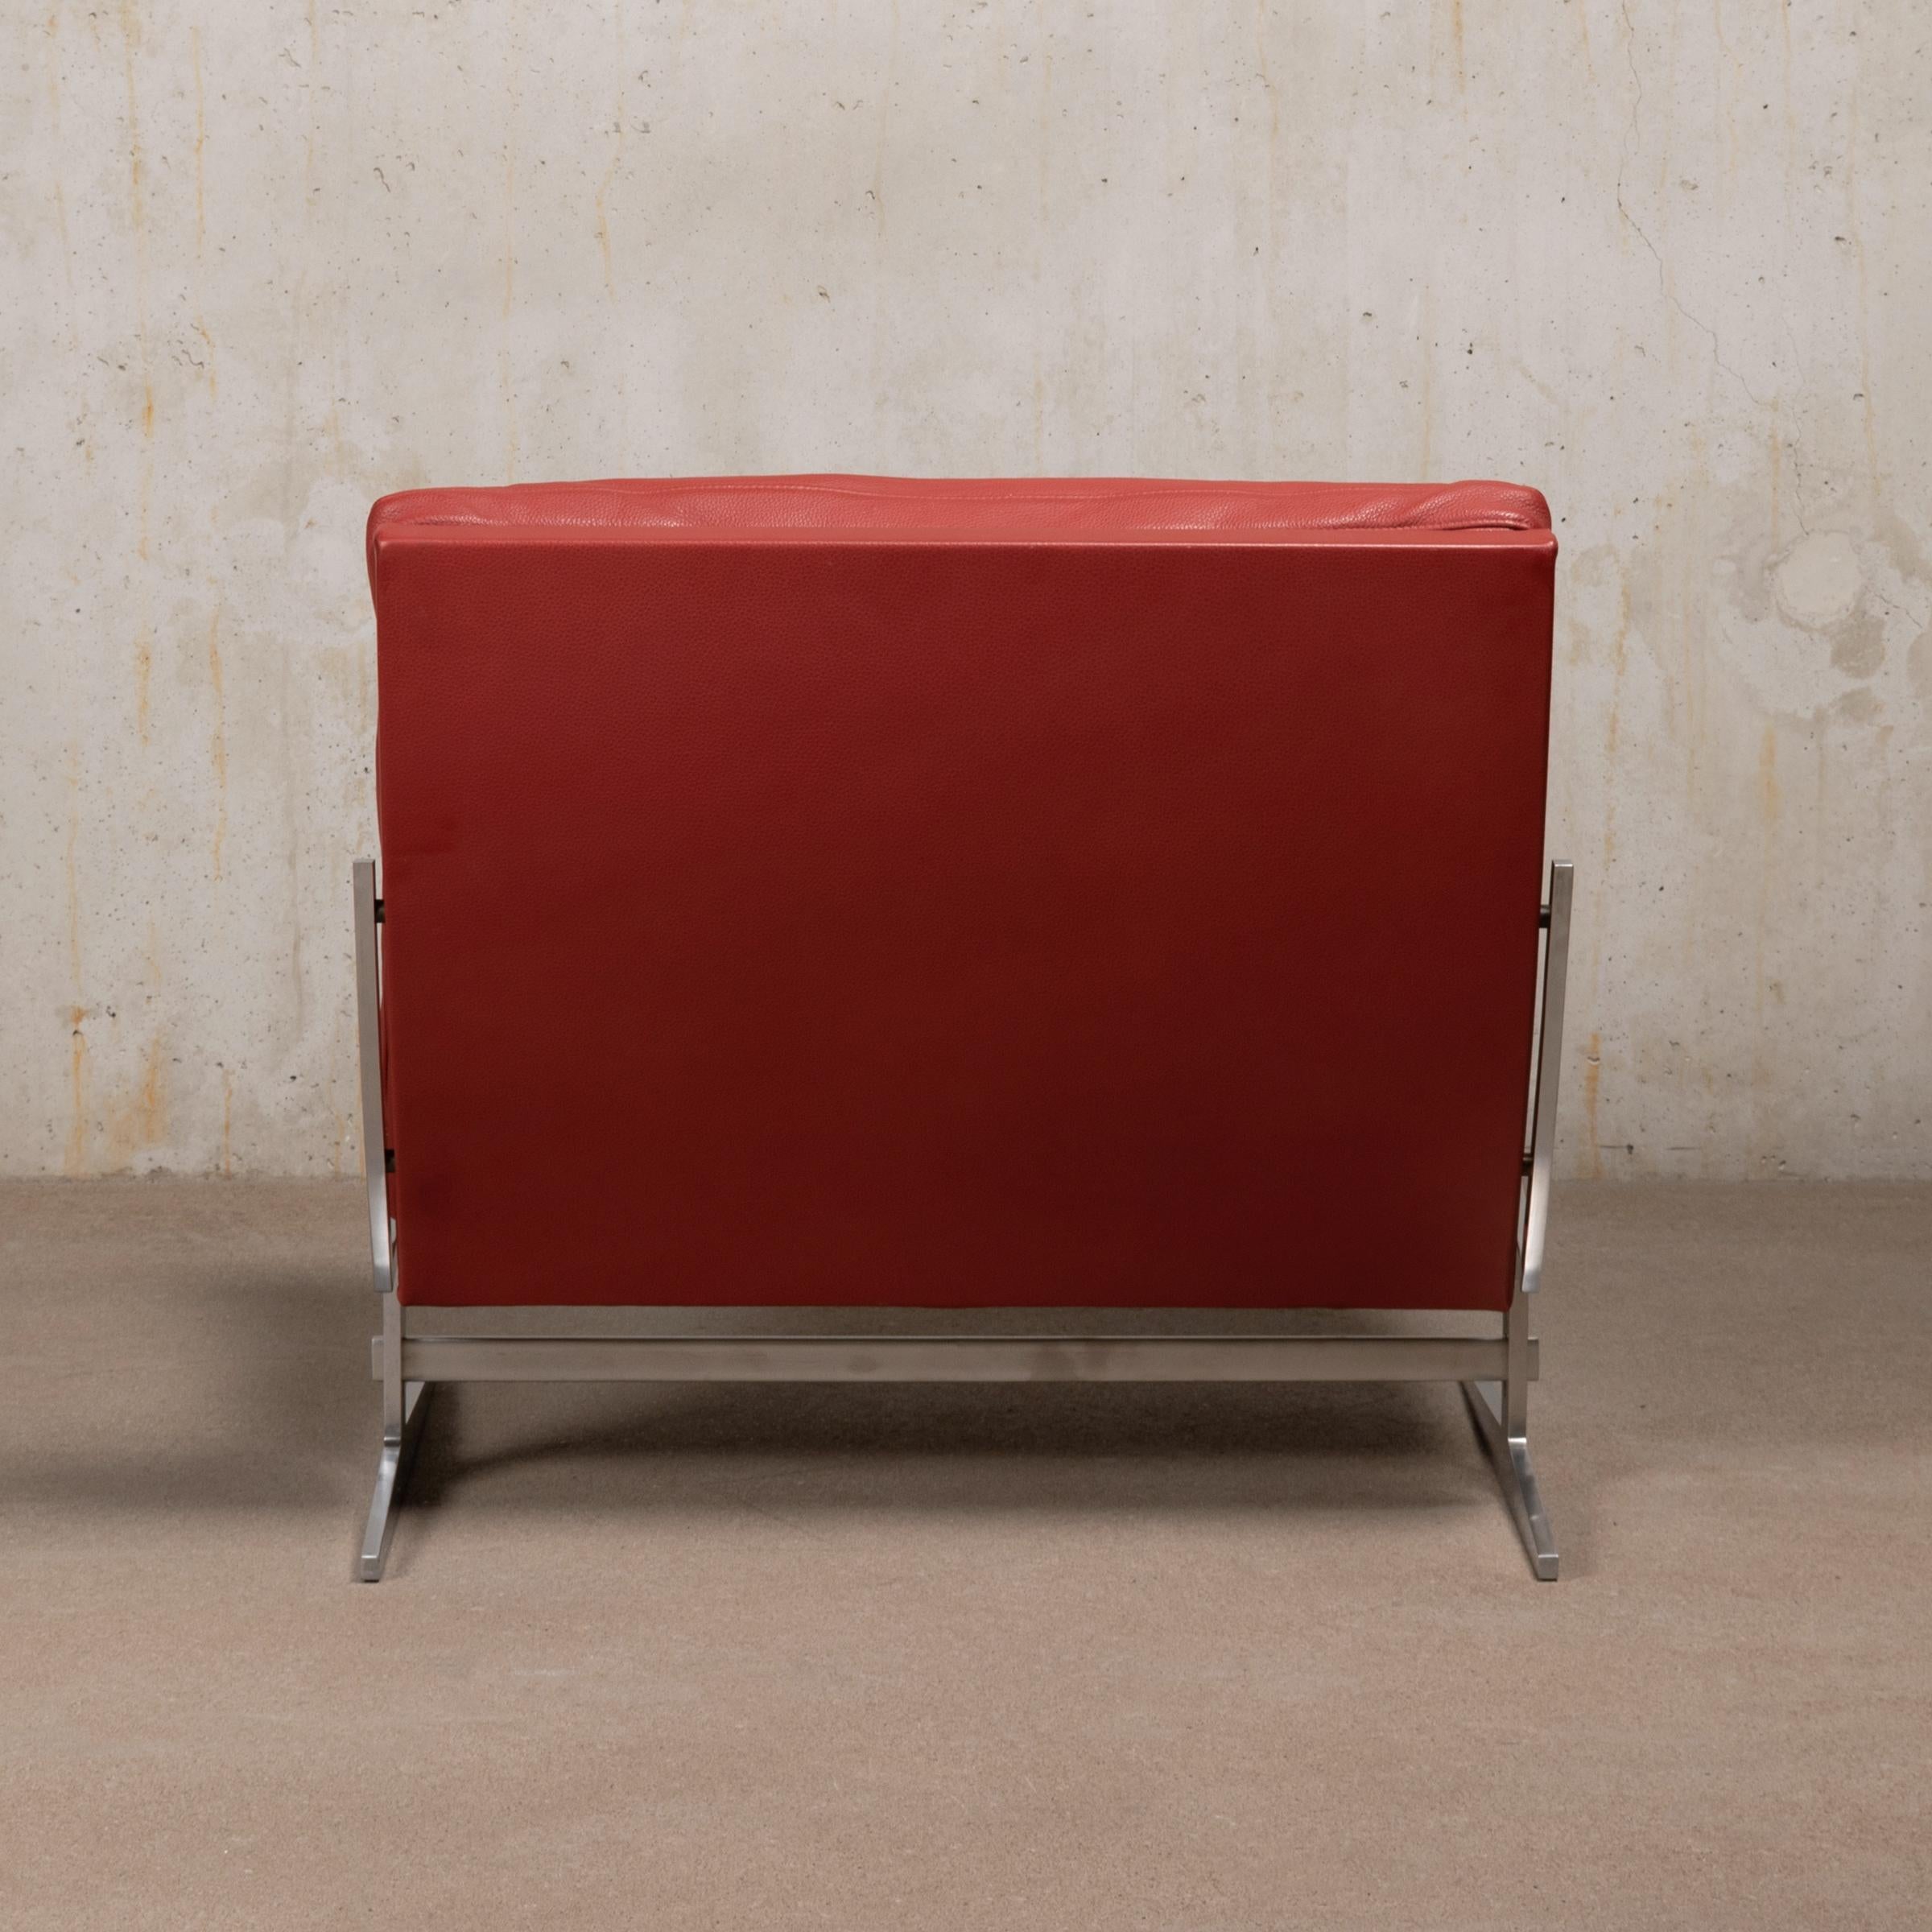 Polished Kastholm & Fabricius BO-561 Lounge Chair in Ruby Red Leather by Bo-Ex Denmark